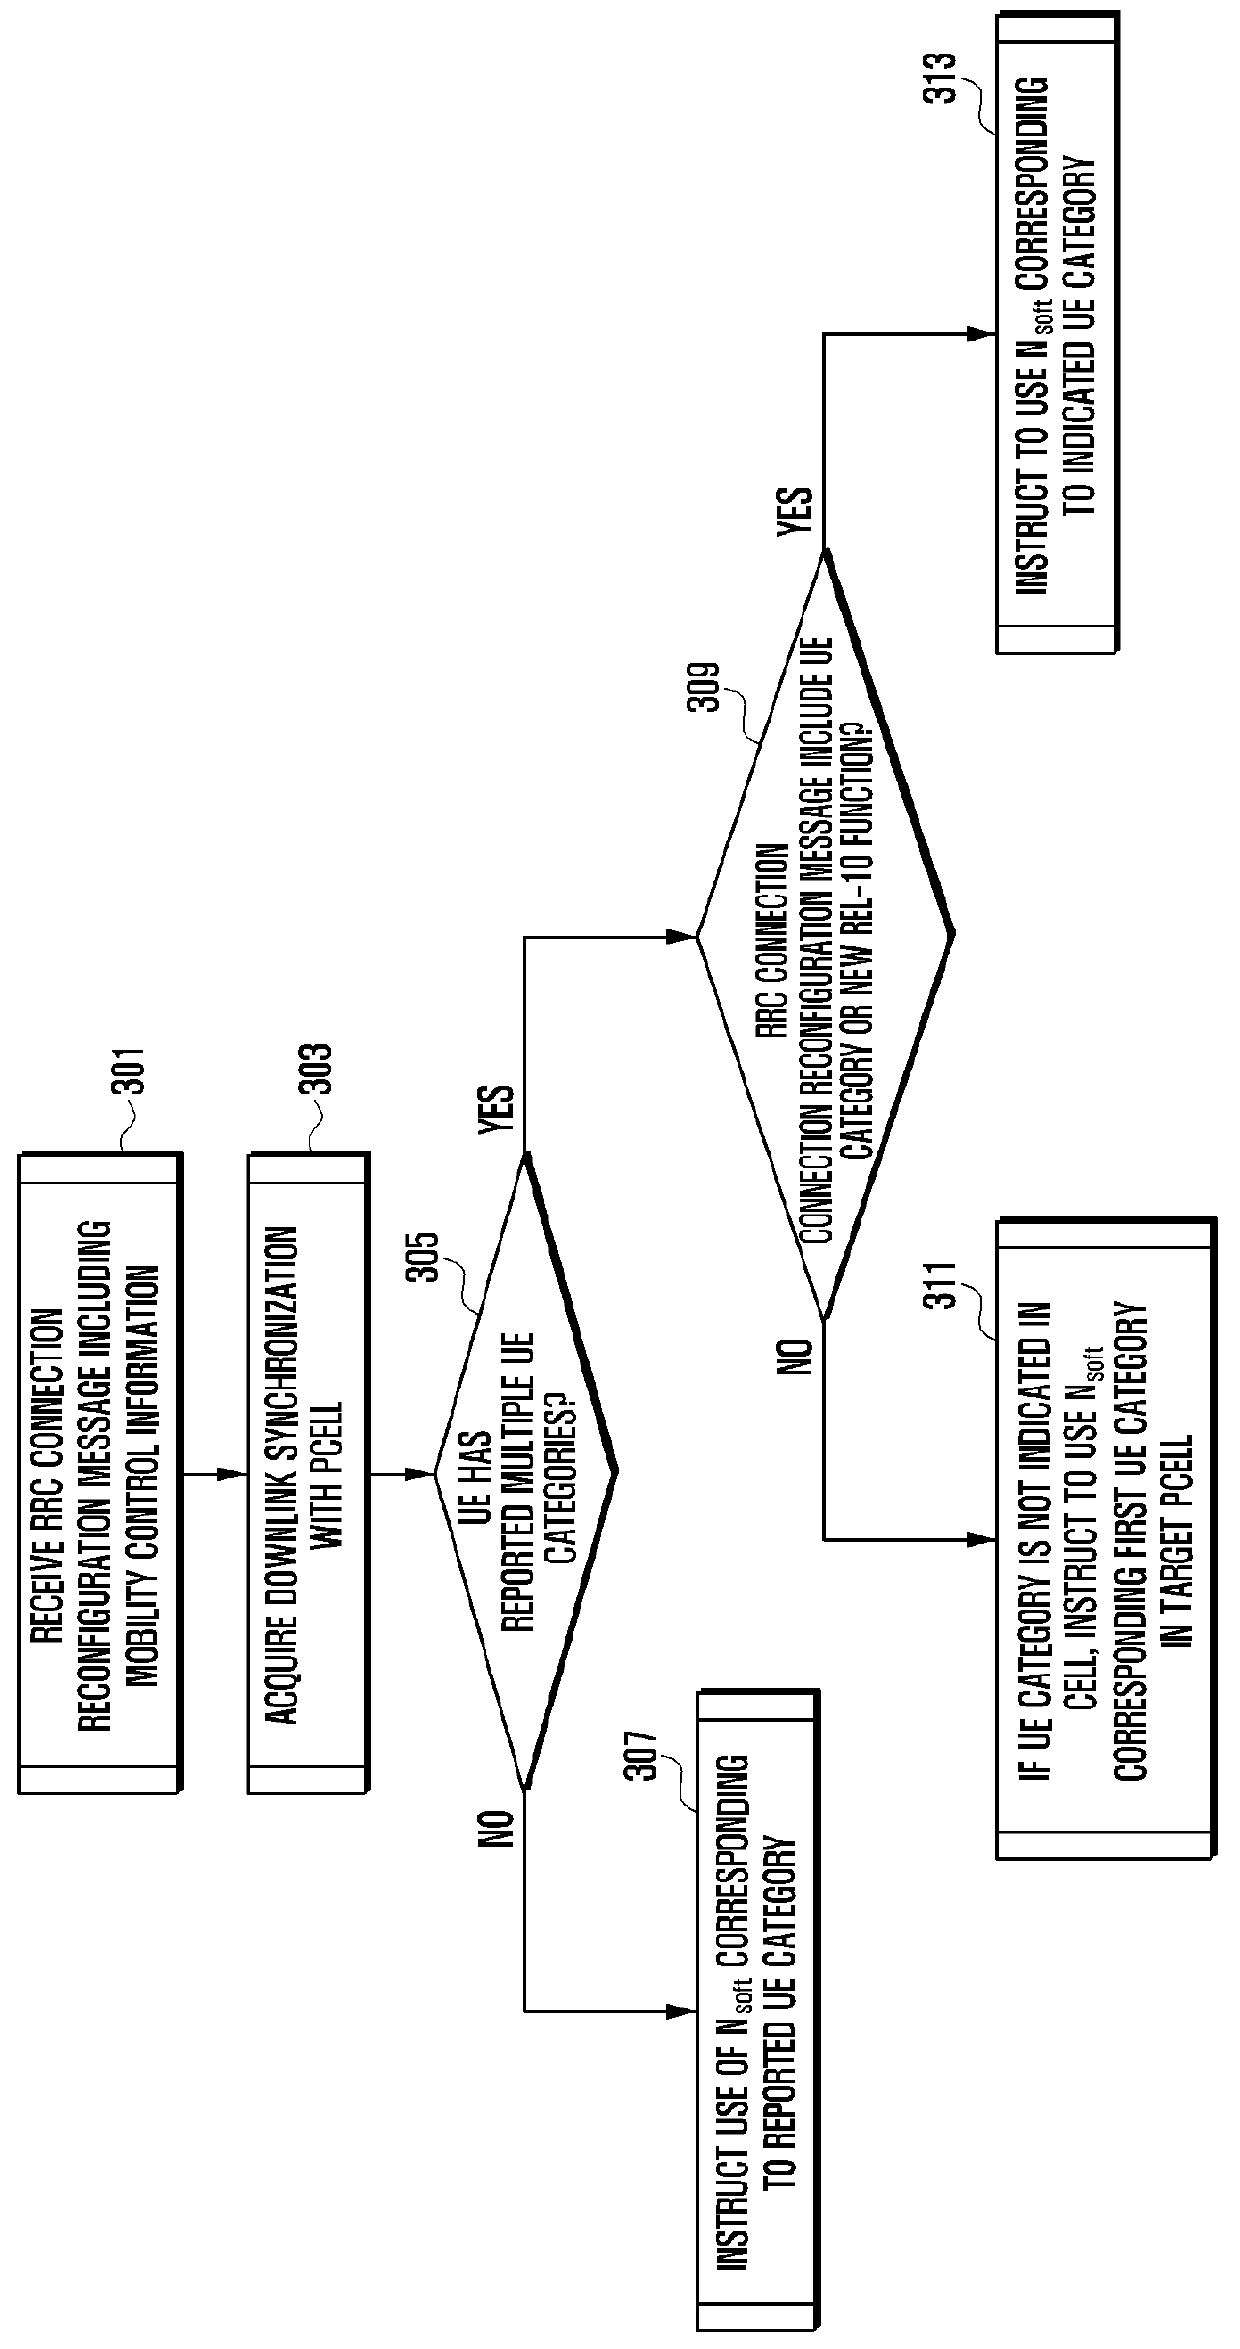 Method and apparatus of handling user equipment category in wireless communication system